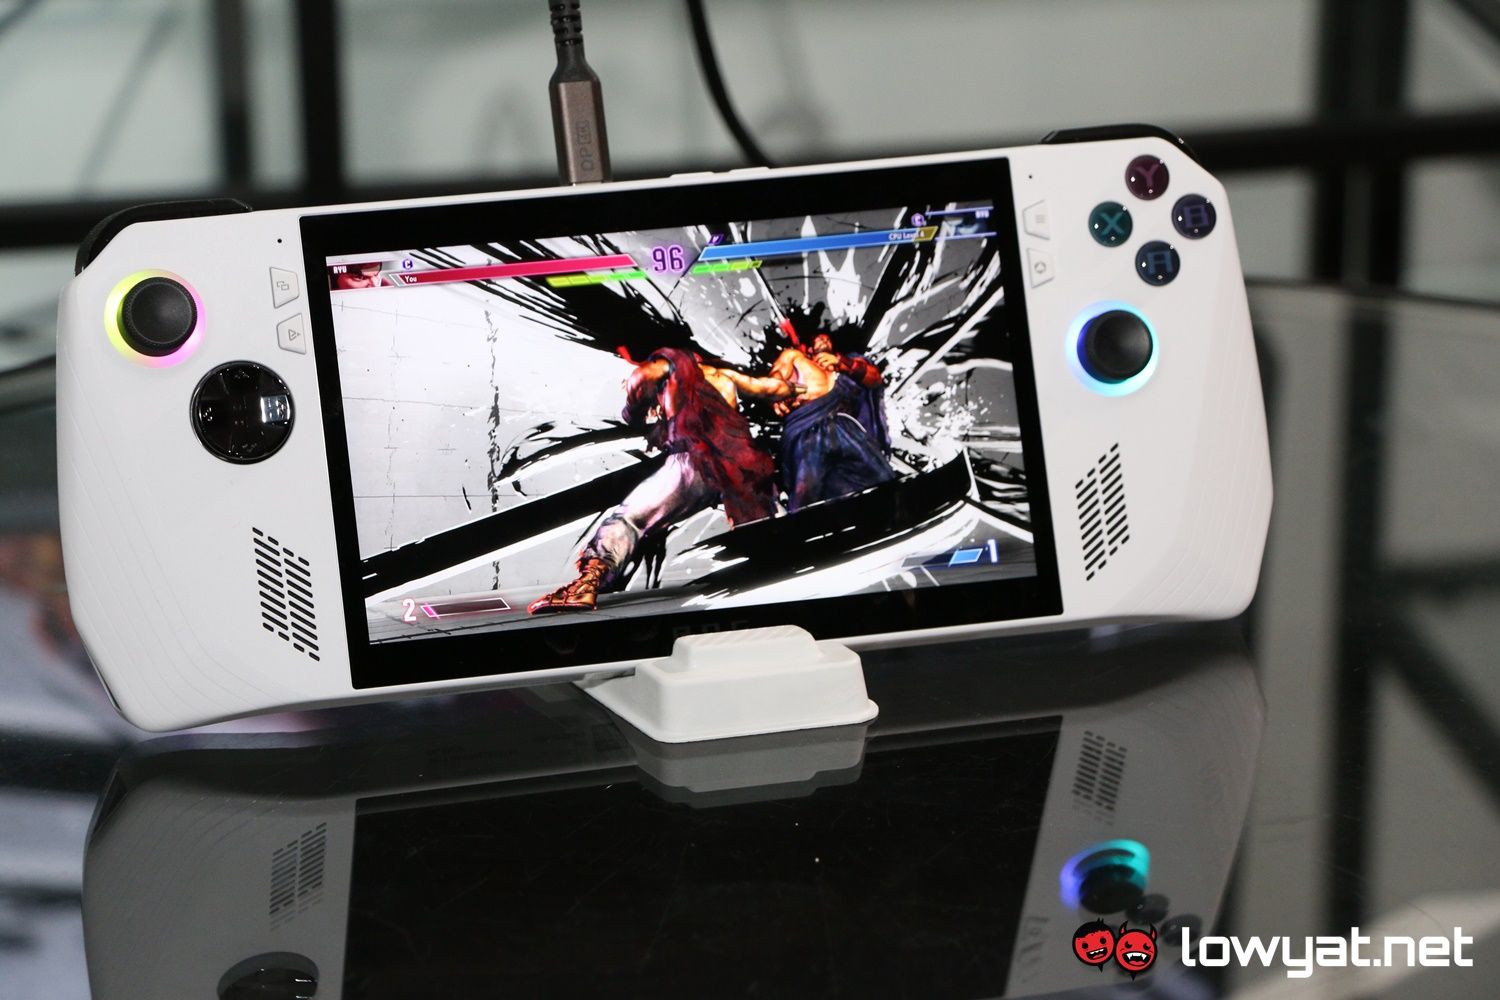 Asus ROG Ally — 3 reasons why I'm hyped about this new handheld